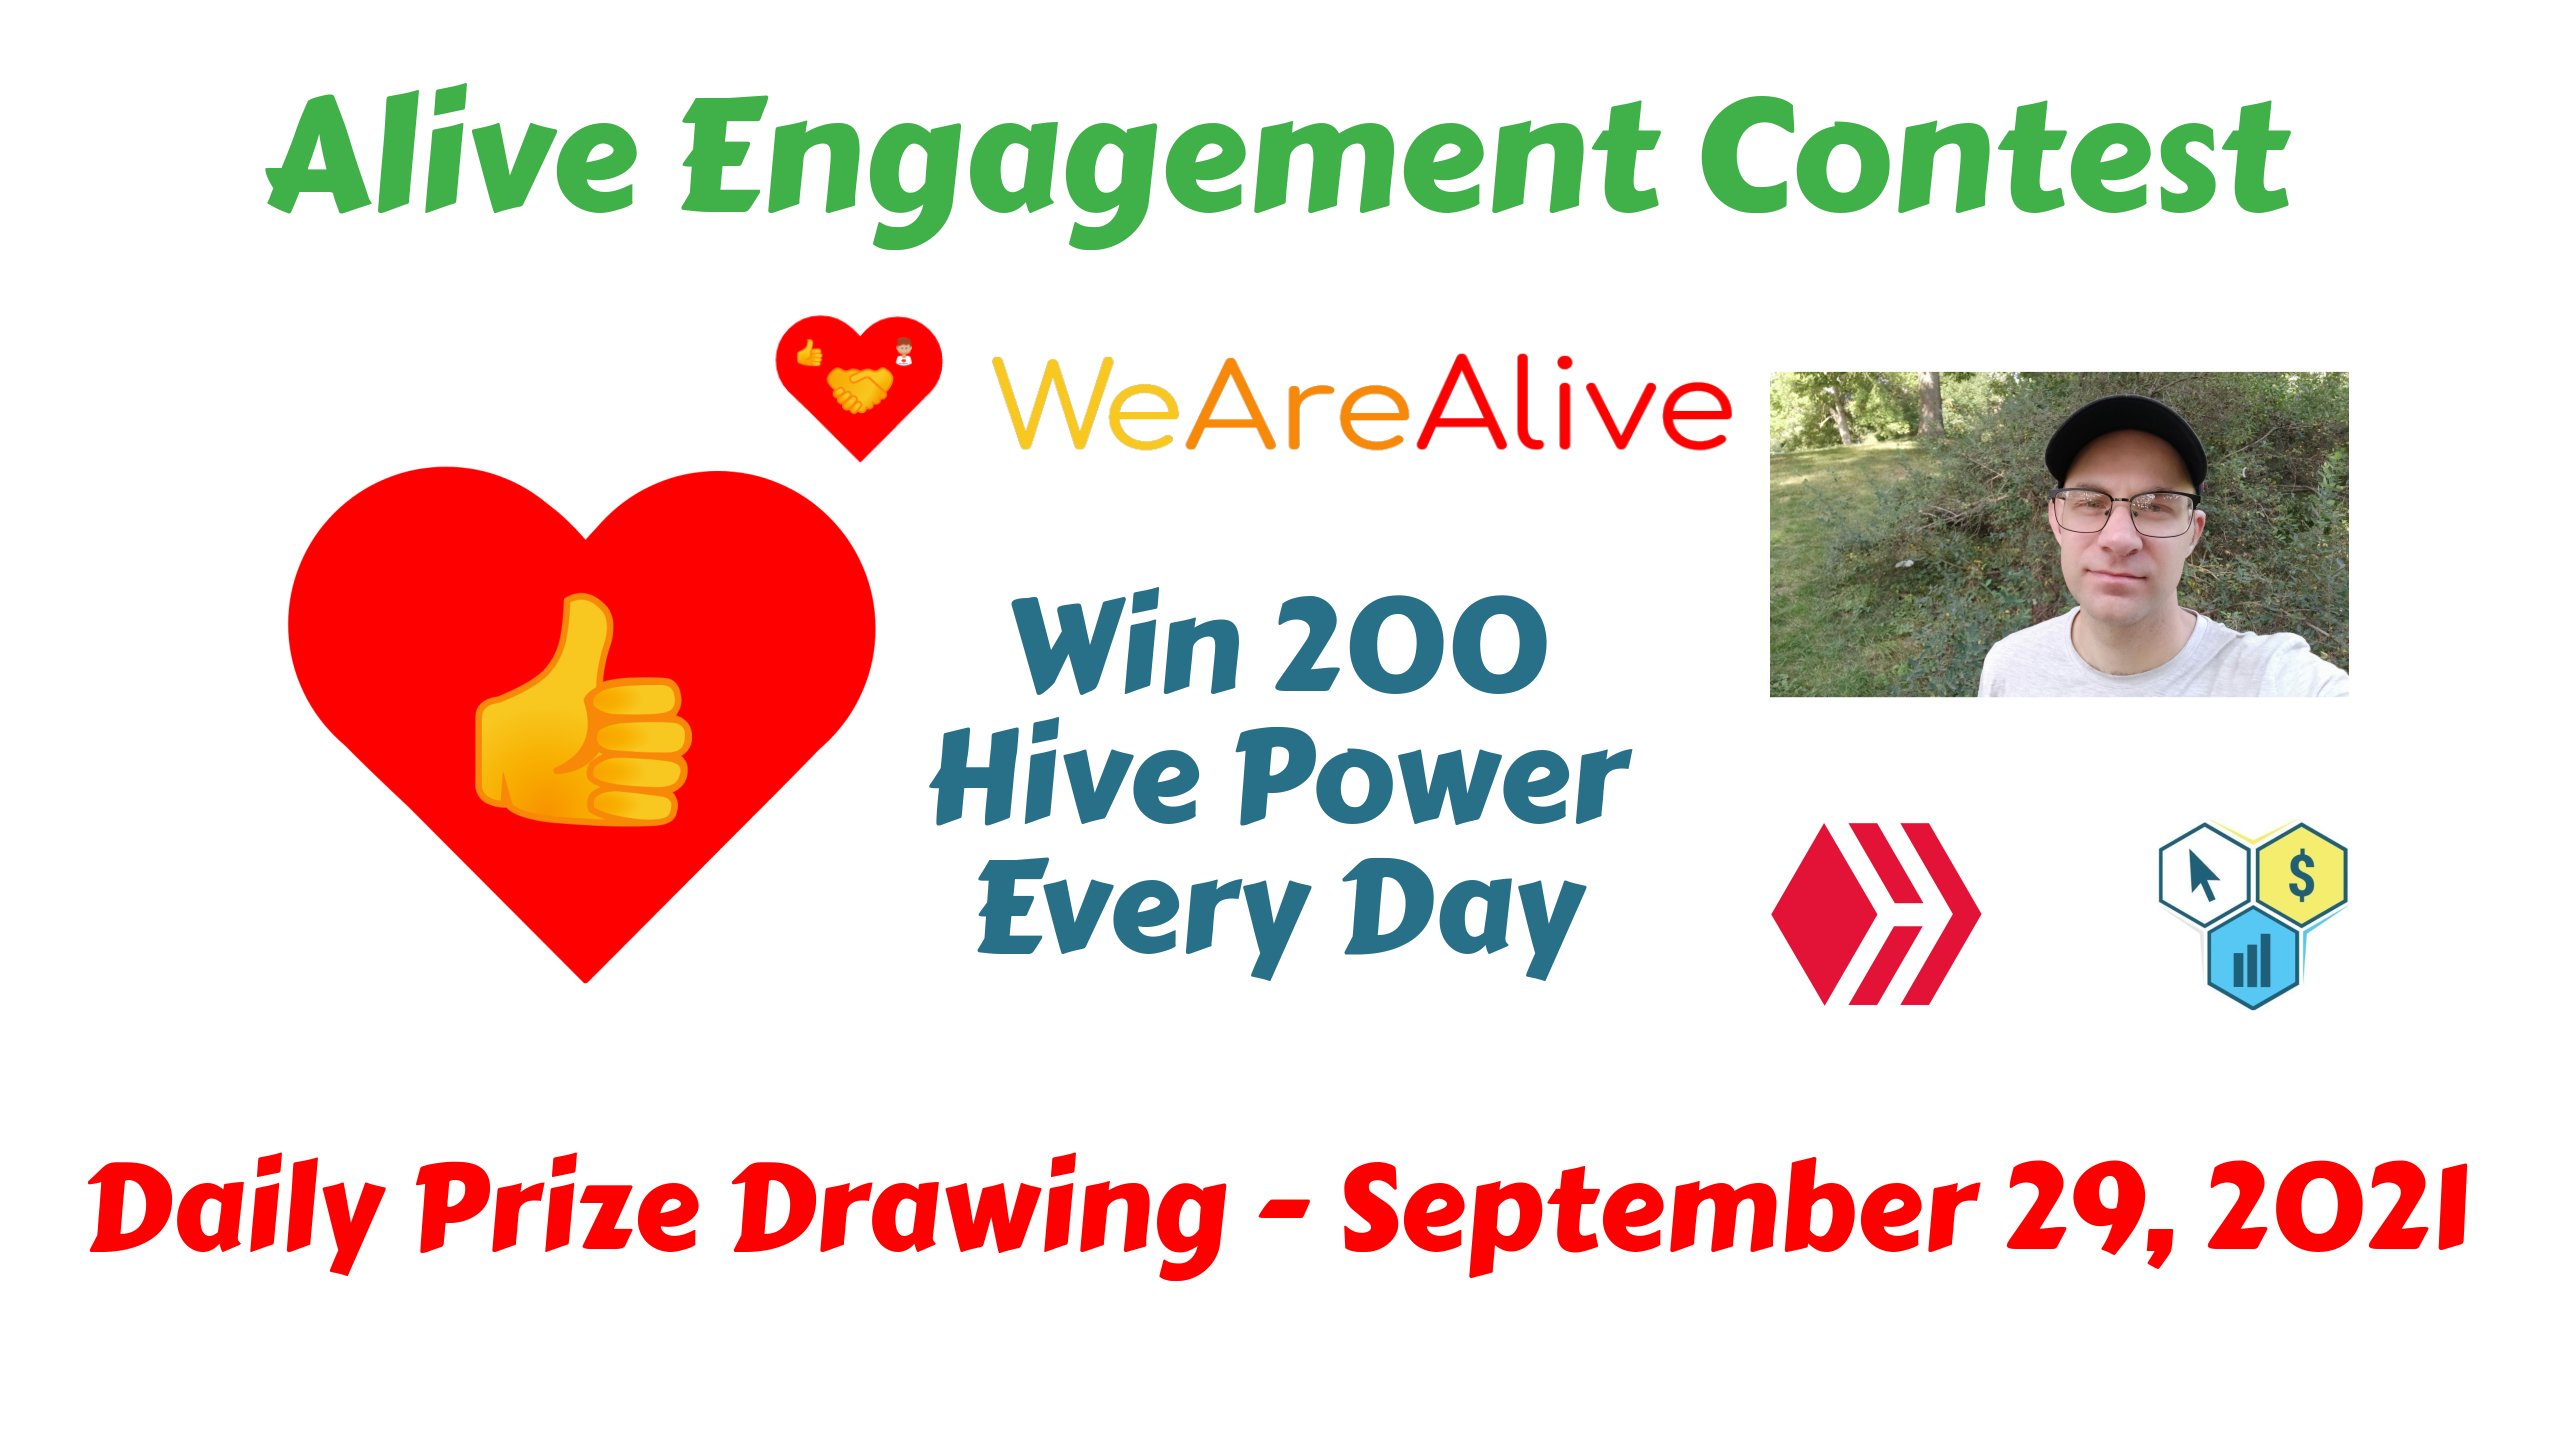 @iamalivechalleng/alive-engagement-contest-win-200-hive-power-every-day-open-for-entries-september-29-2021